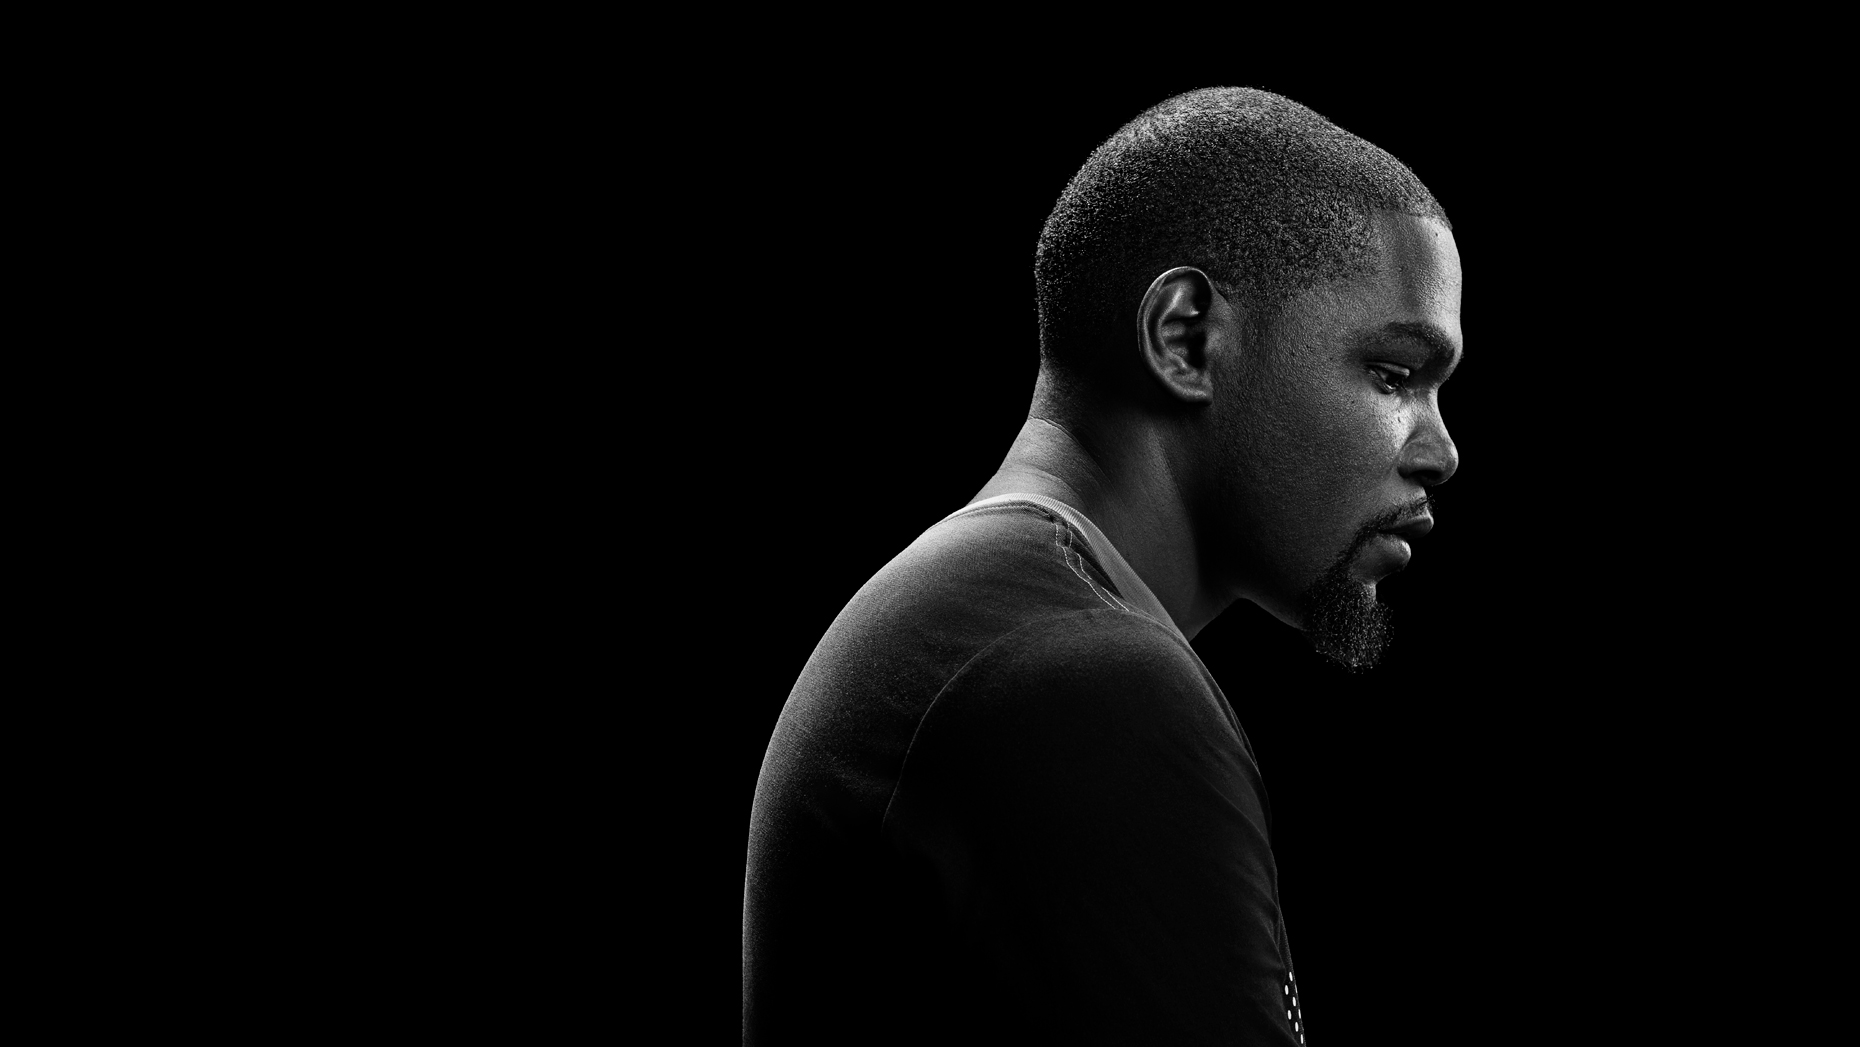 Kevin Durant Image Retouching